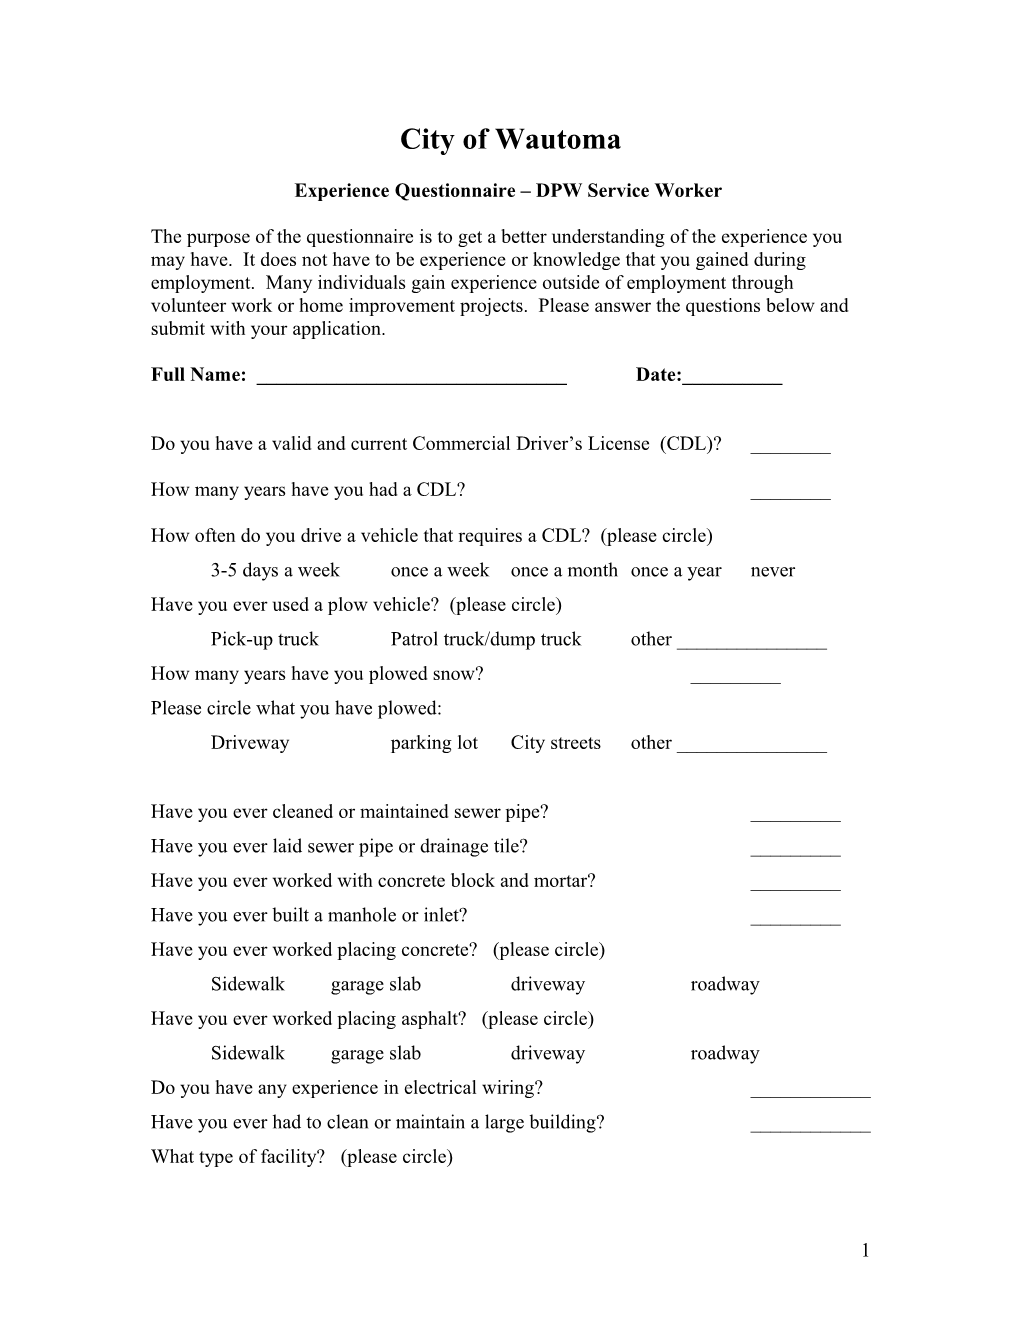 Experience Questionnaire DPW Service Worker